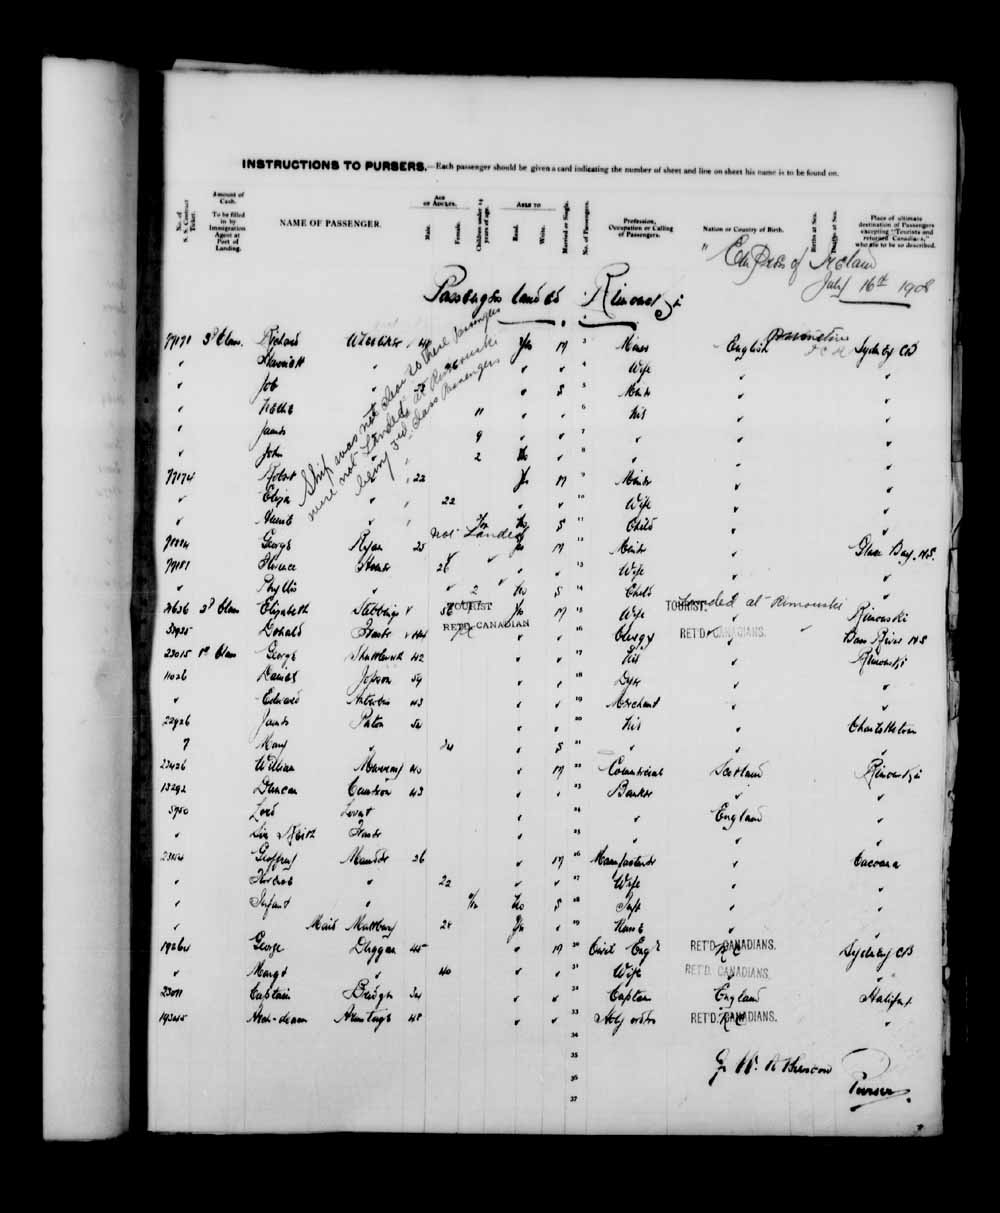 Digitized page of Quebec Passenger Lists for Image No.: e003591276